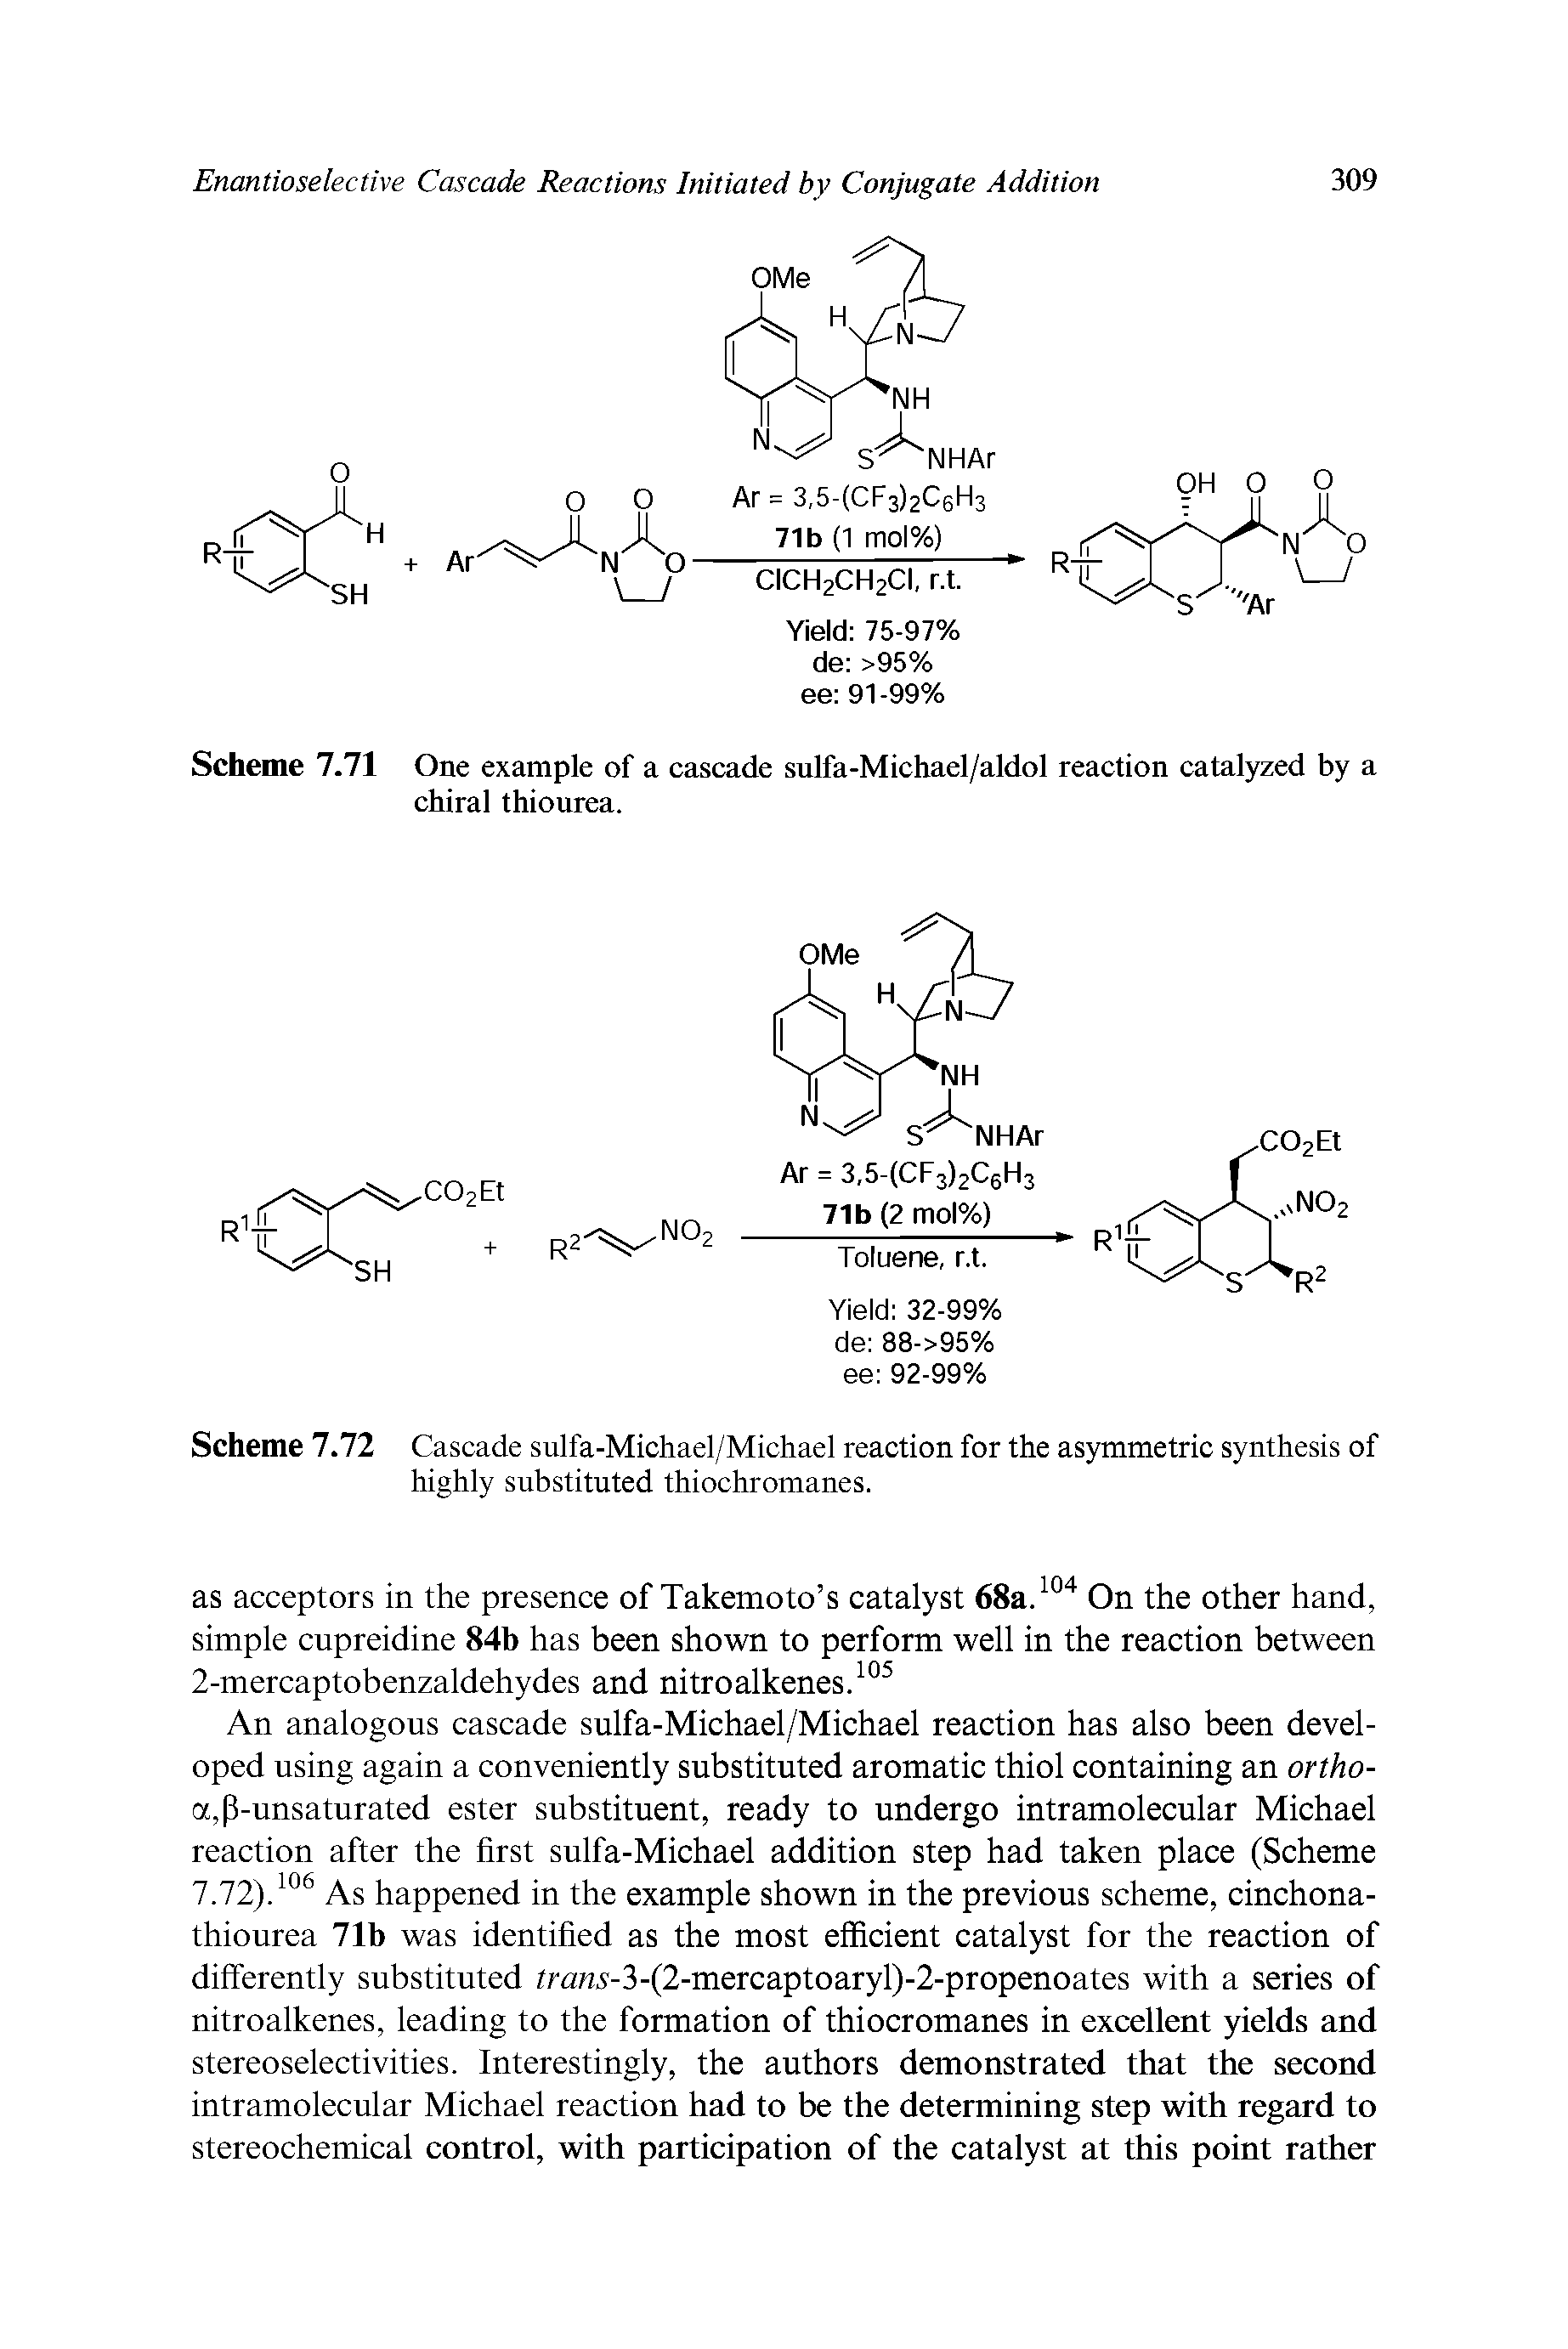 Scheme 7.72 Cascade sulfa-Michael/Michael reaction for the asymmetric synthesis of highly substituted thiochromanes.